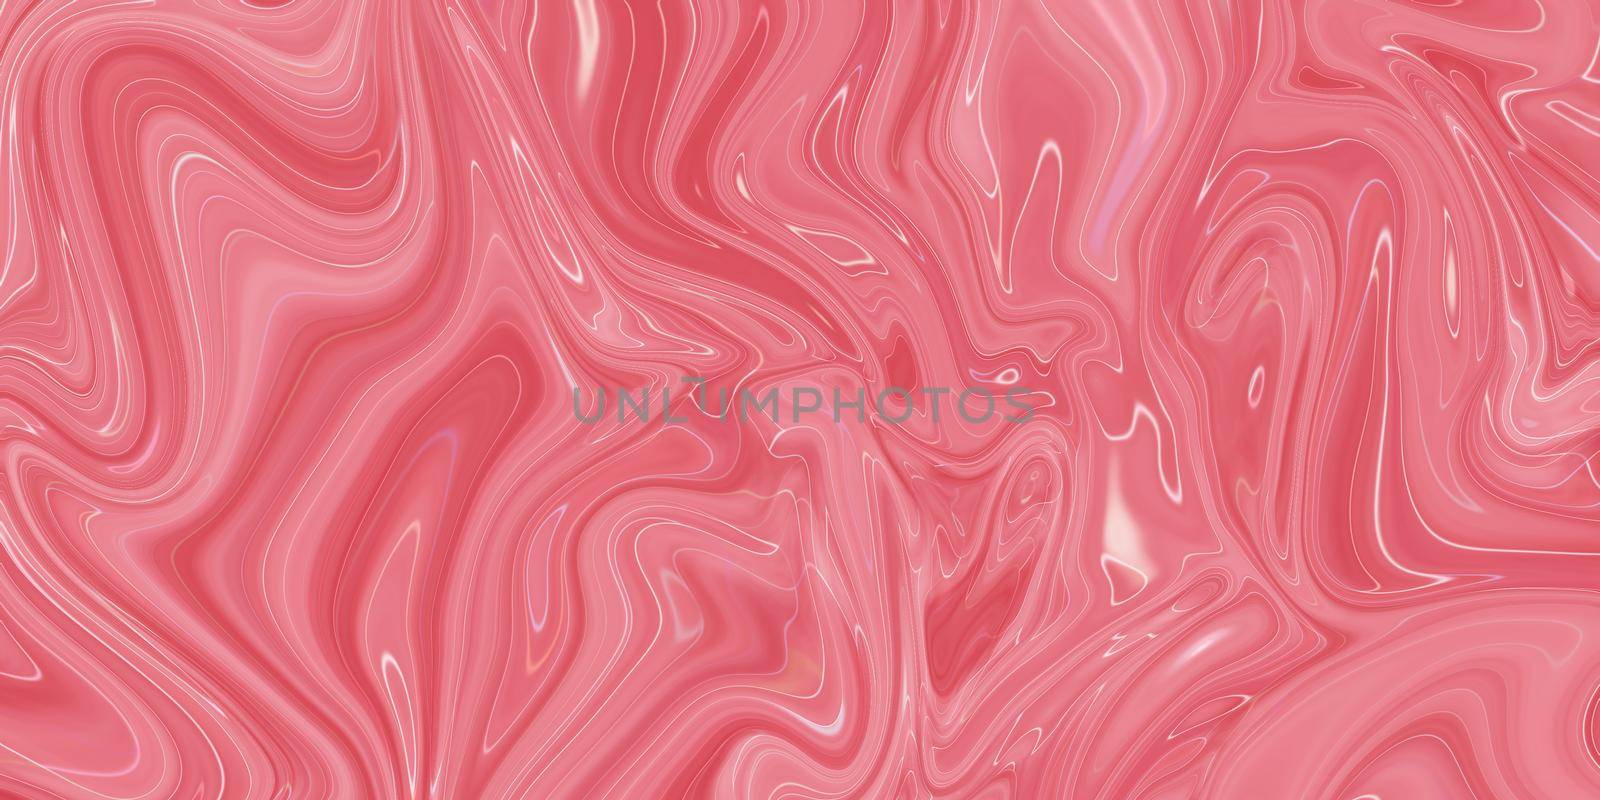 Swirls of marble or the ripples of agate. Liquid marble texture with pink colors. Abstract painting background for wallpapers, posters, cards, invitations, websites. Fluid art.